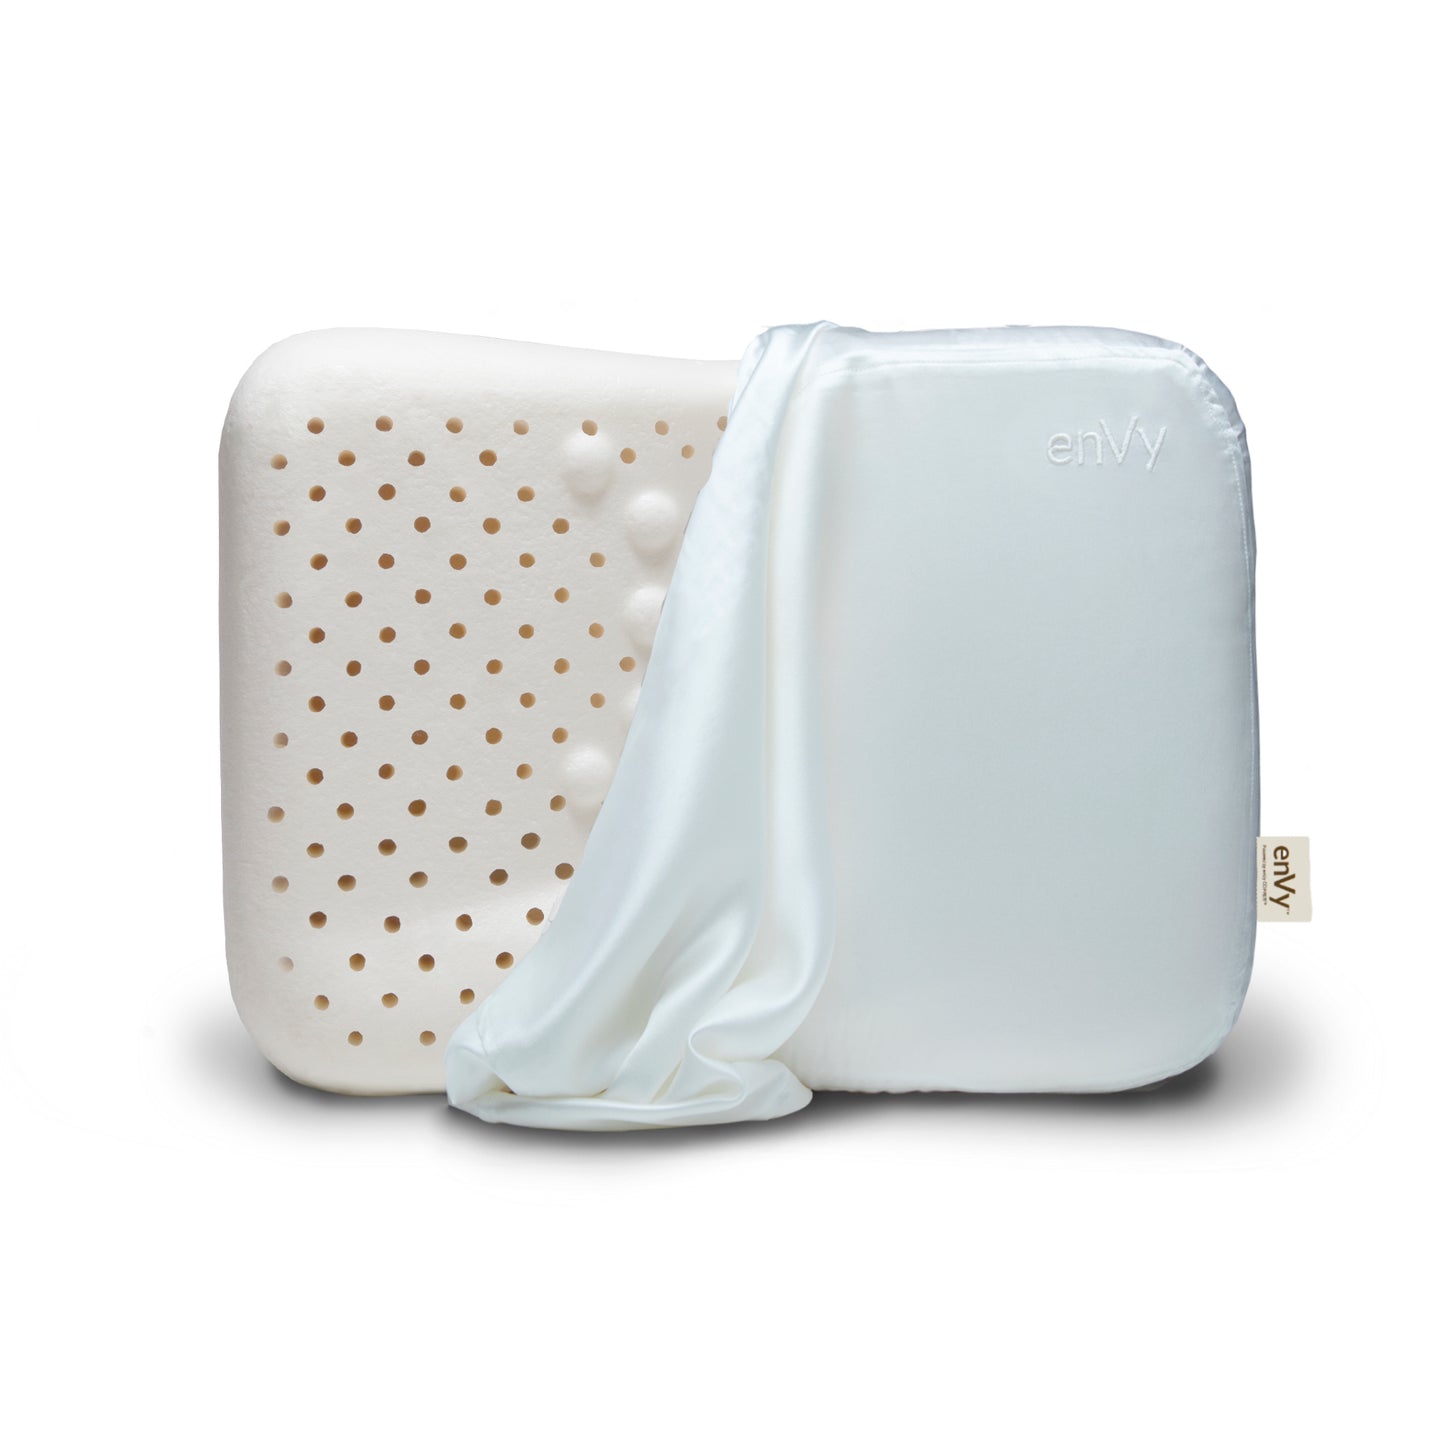 enVy® TO GO Travel Pillow (With COPPER infused SILK Pillowcase Edition)